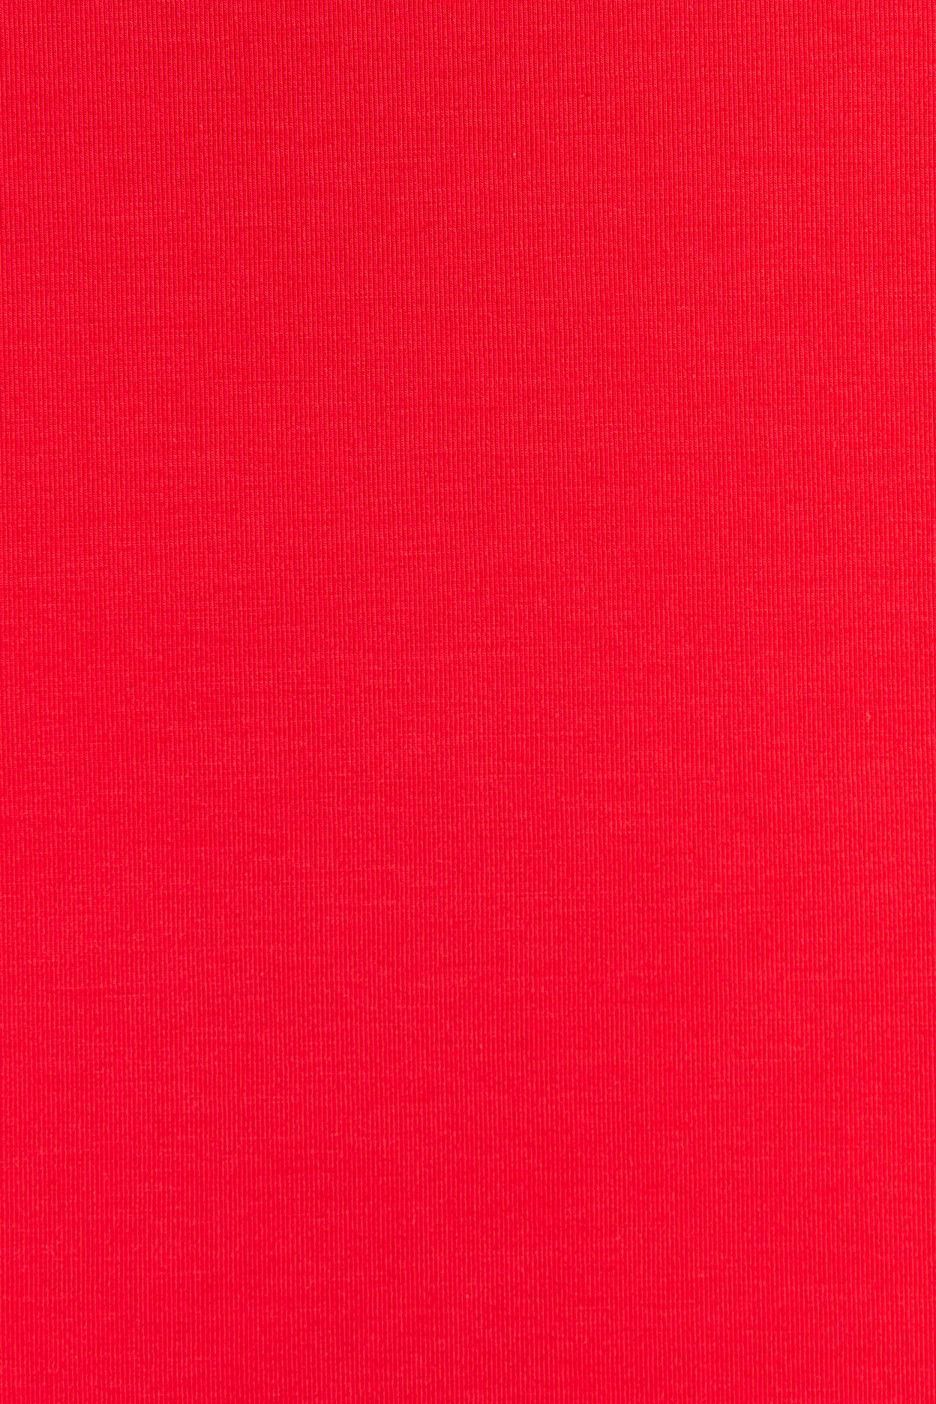 Solid Red Wallpapers - Wallpaper Cave